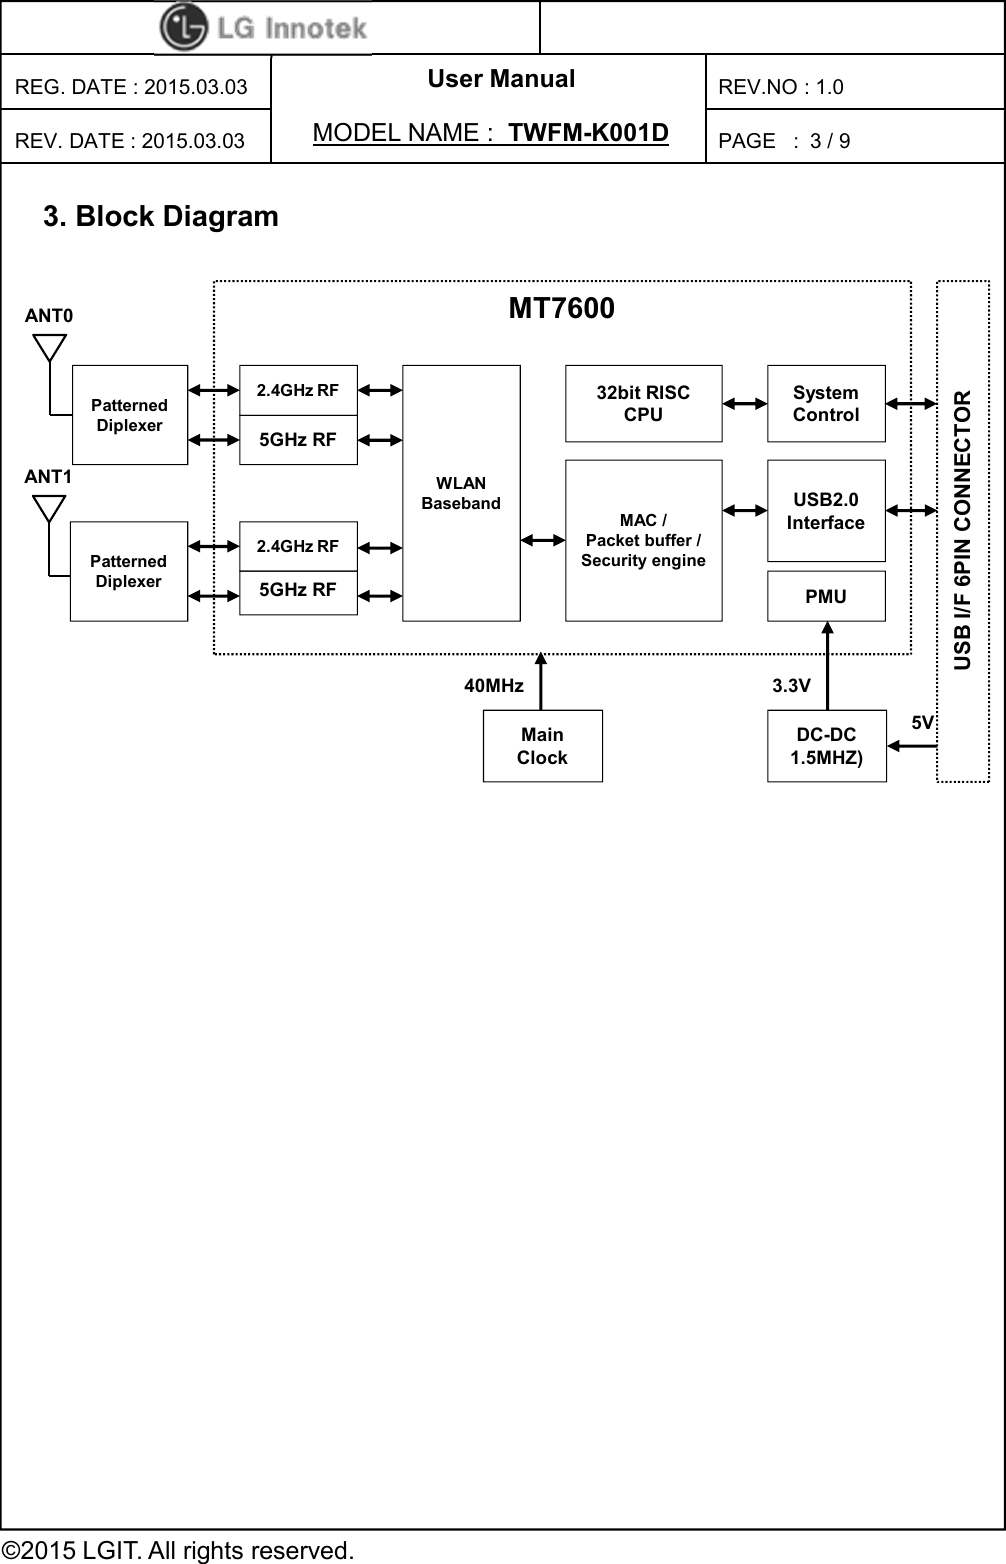 User Manual PAGE   : REG. DATE : 2015.03.03 MODEL NAME :  TWFM-K001D  REV. DATE : 2015.03.03 REV.NO : 1.0 ©2015 LGIT. All rights reserved. 3 / 9 3. Block Diagram    MT7600 2.4GHz RF 5GHz RF 2.4GHz RF 5GHz RF WLAN Baseband 32bit RISC CPU MAC / Packet buffer / Security engine System Control PMU USB2.0 Interface USB I/F 6PIN CONNECTOR DC-DC 1.5MHZ) 3.3V 5V Main Clock 40MHz Patterned Diplexer Patterned Diplexer ANT0 ANT1 